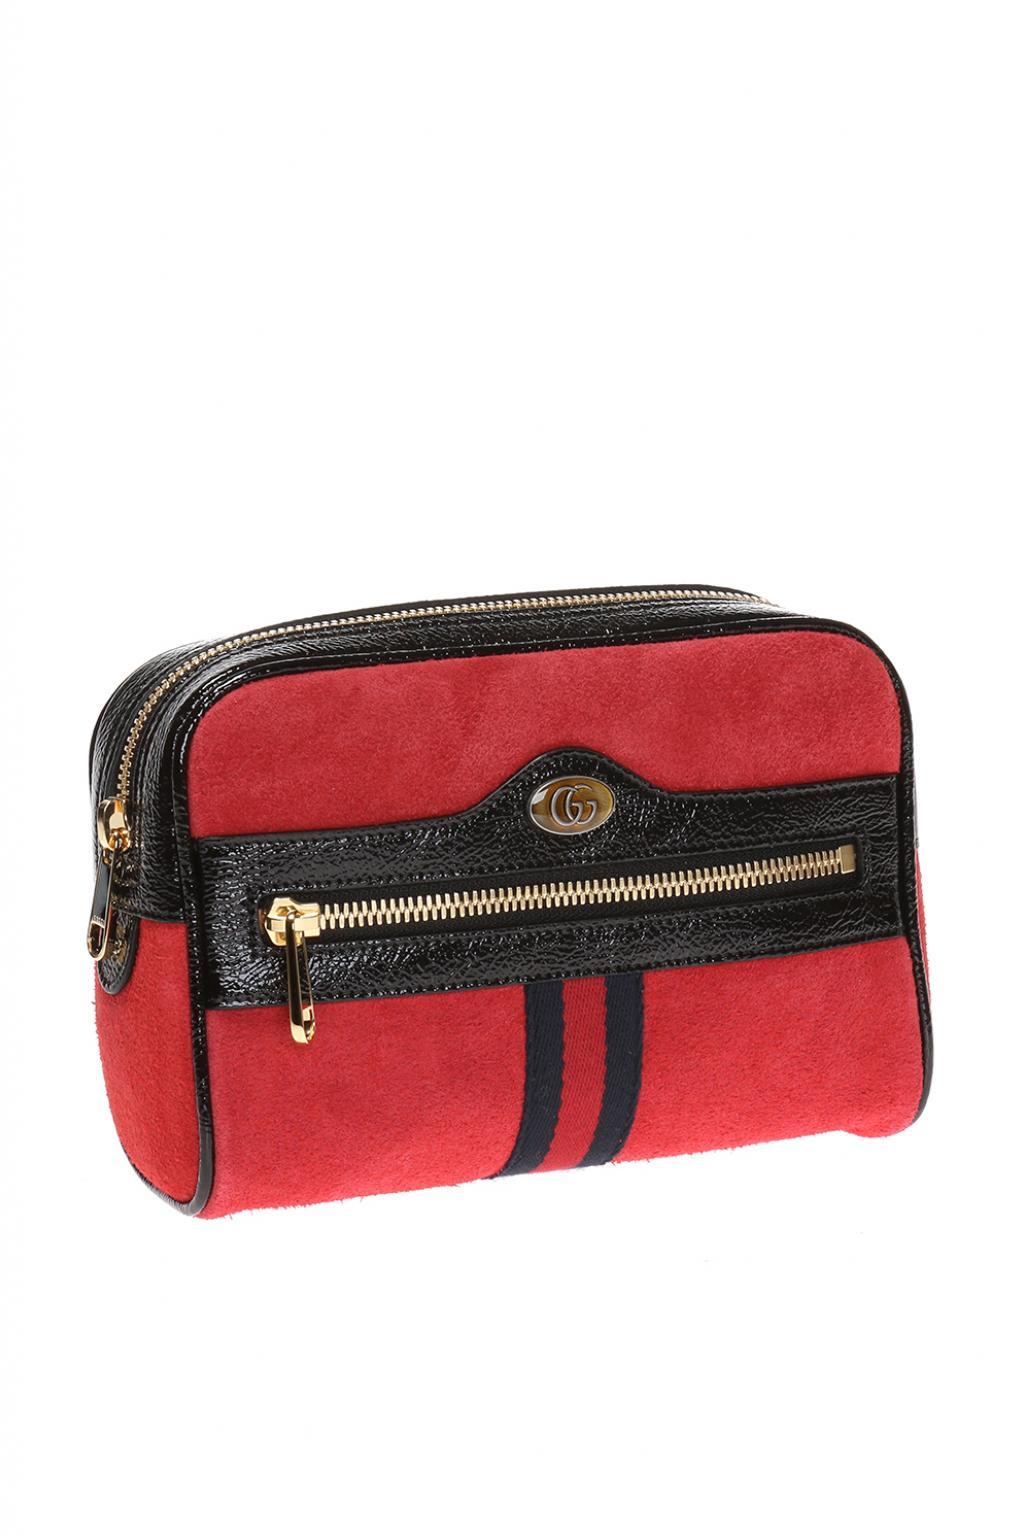 Gucci Leather &#39;ophidia&#39; Belt Bag in Red for Men - Lyst